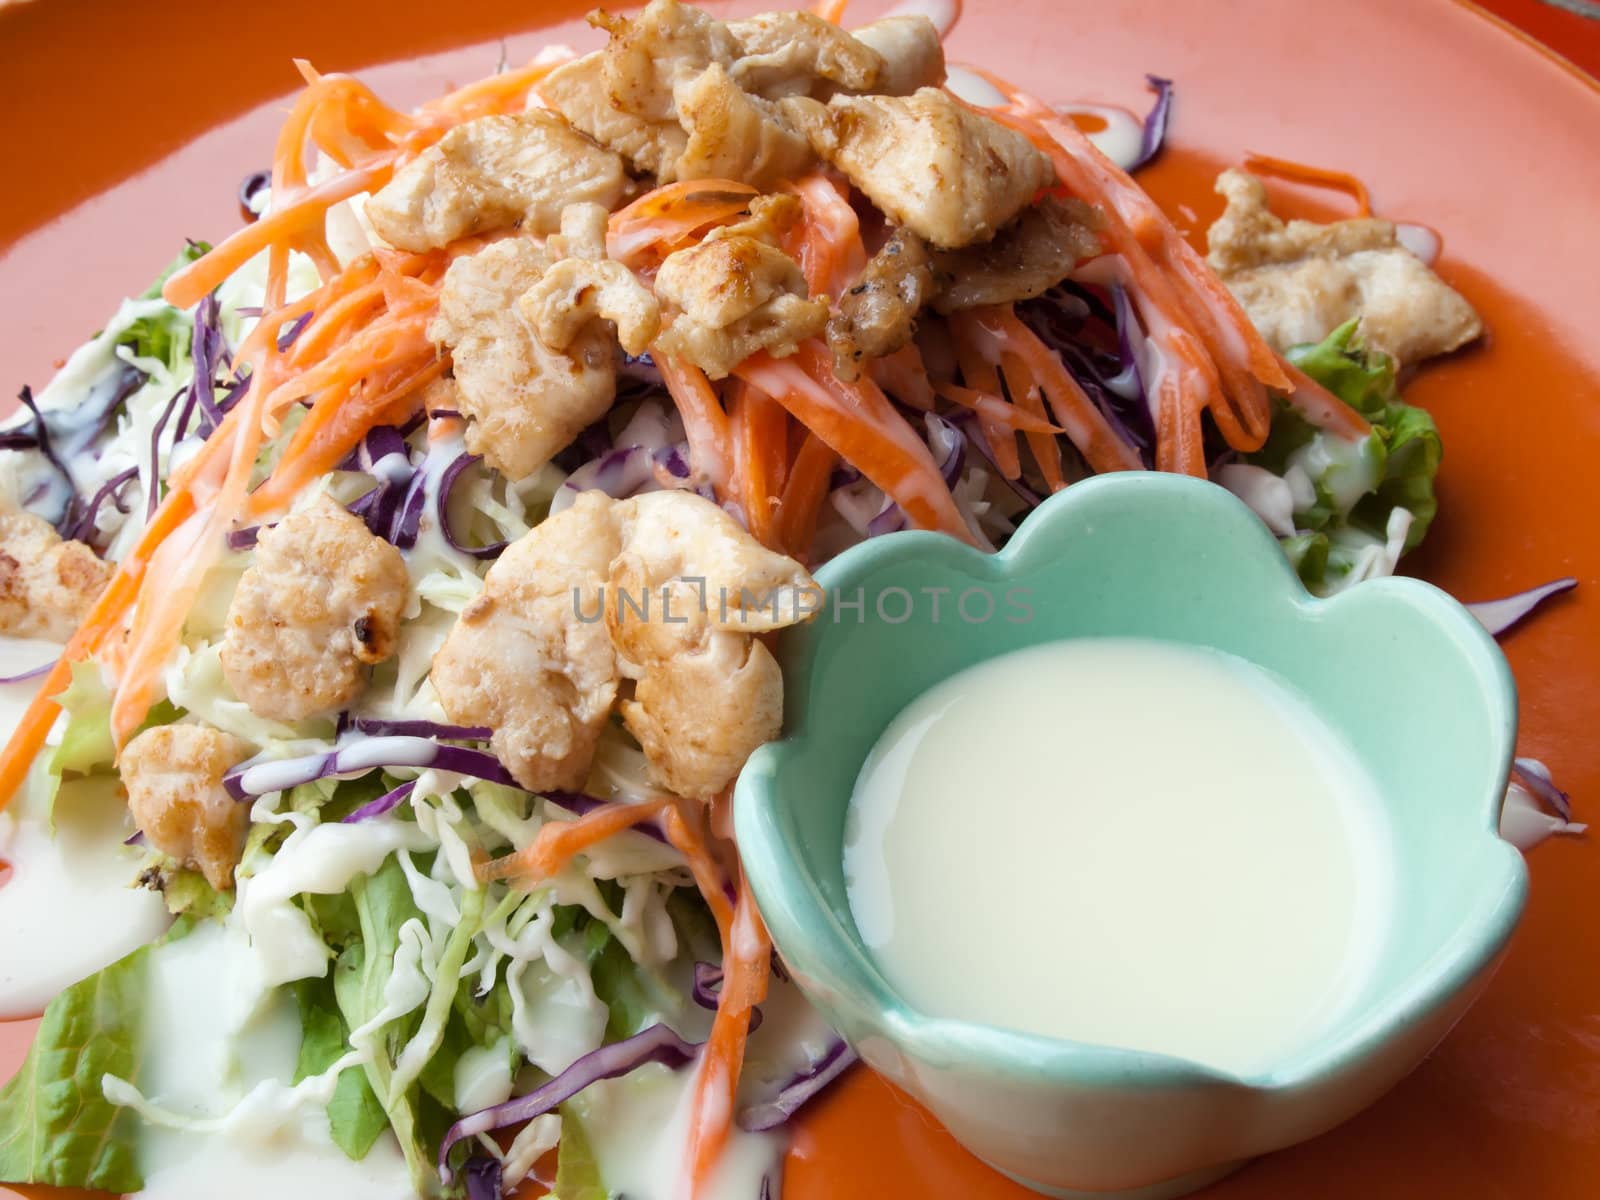 Chicken salad on a plate by nuttakit